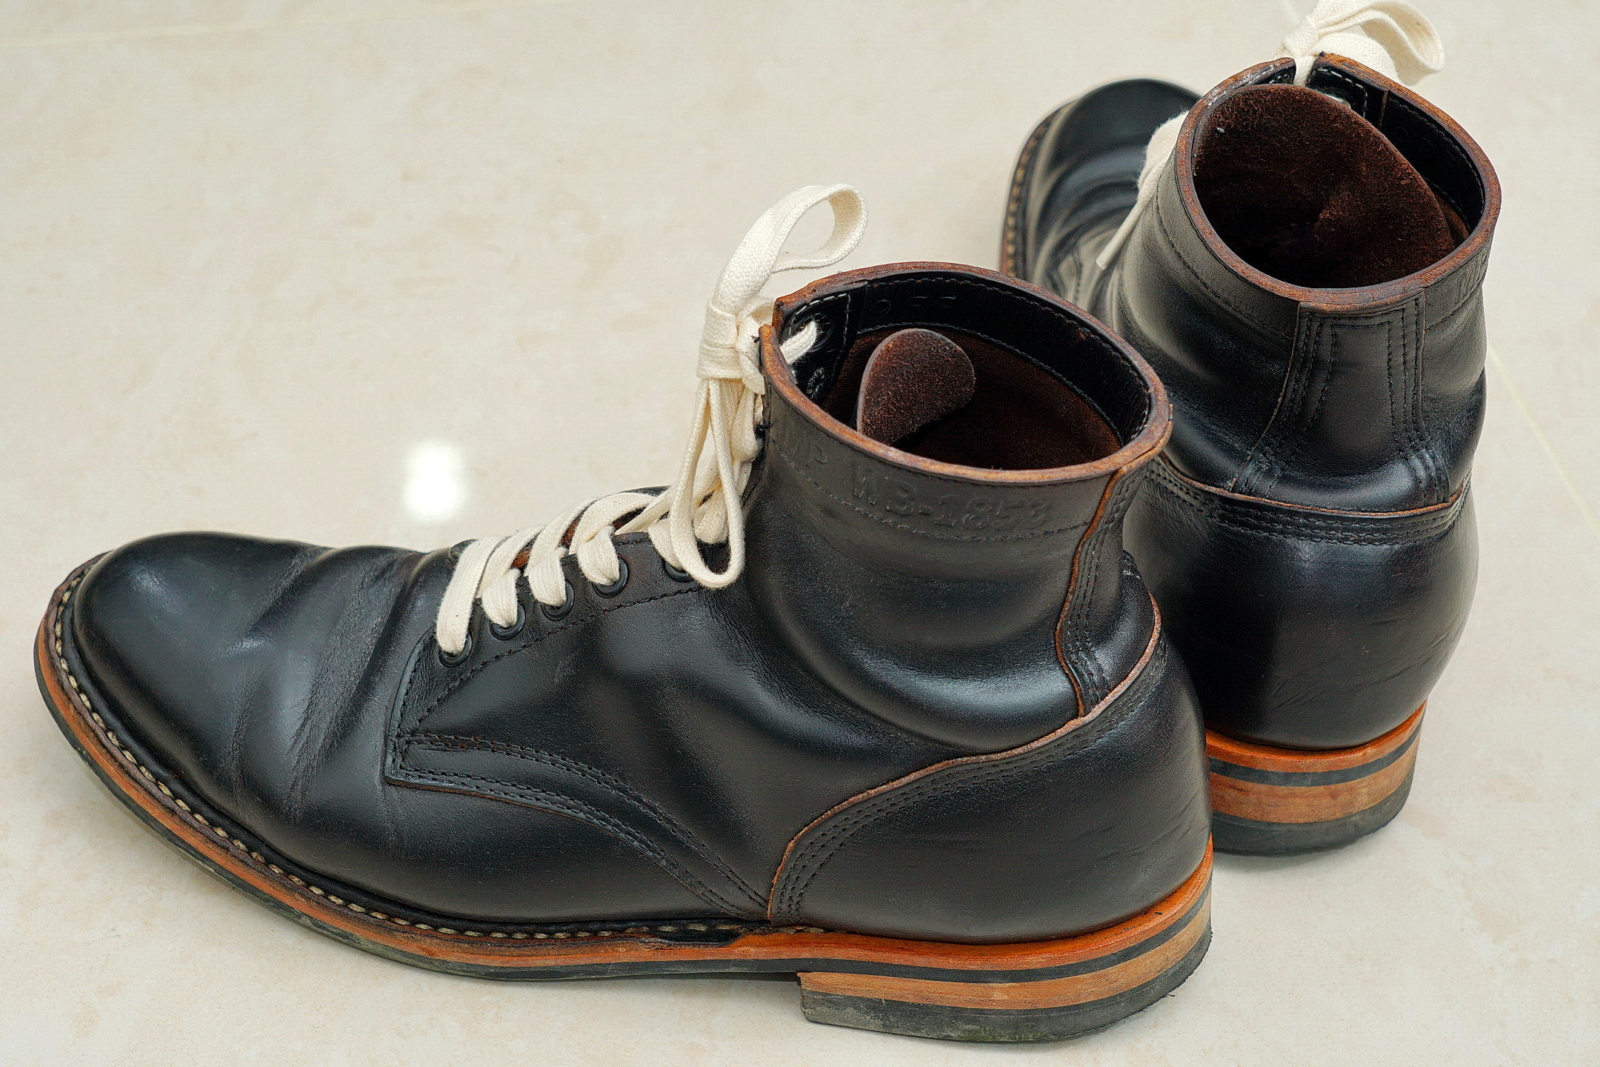 White's MP Service Boots 5Inches Horween CXL BLK 軍警靴， Stylish Pose 3